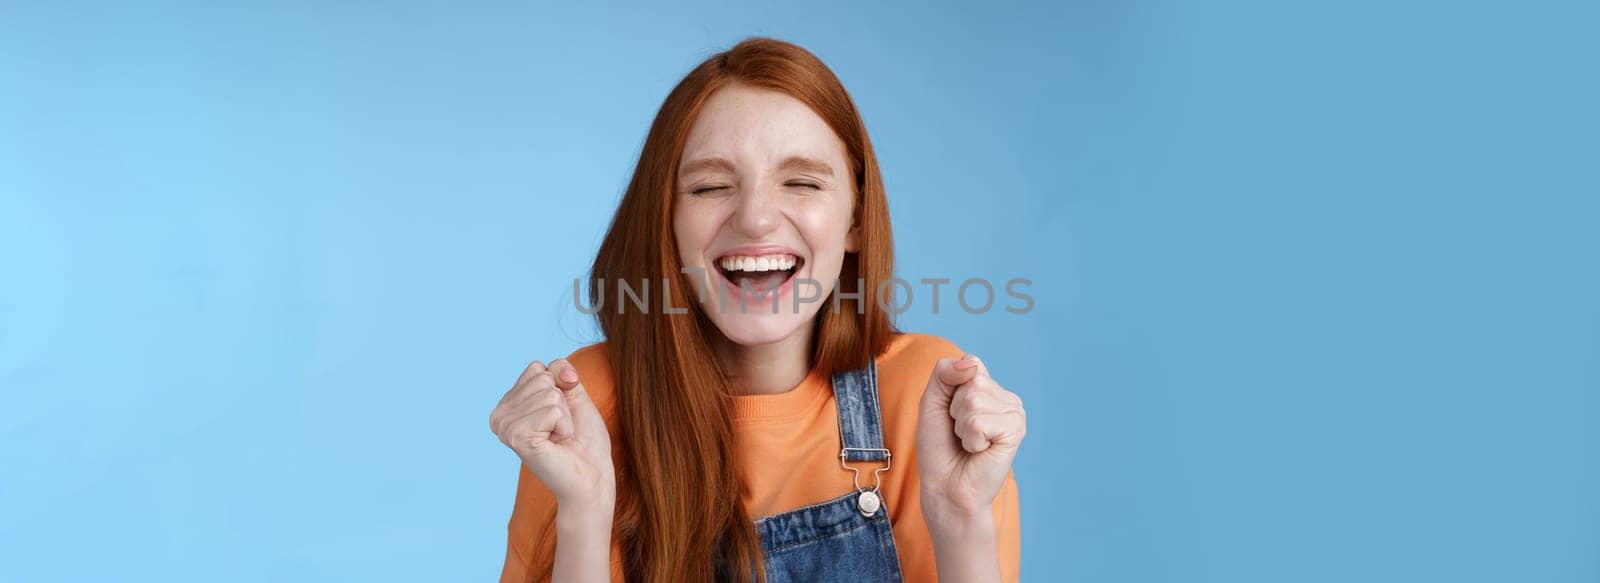 Sincere happy rejocing ginger girl close eyes smiling broadly say yes waving clenched fists joyfully celebrate enterting university dream come true winning prize triumphing cheerfully blue background by Benzoix